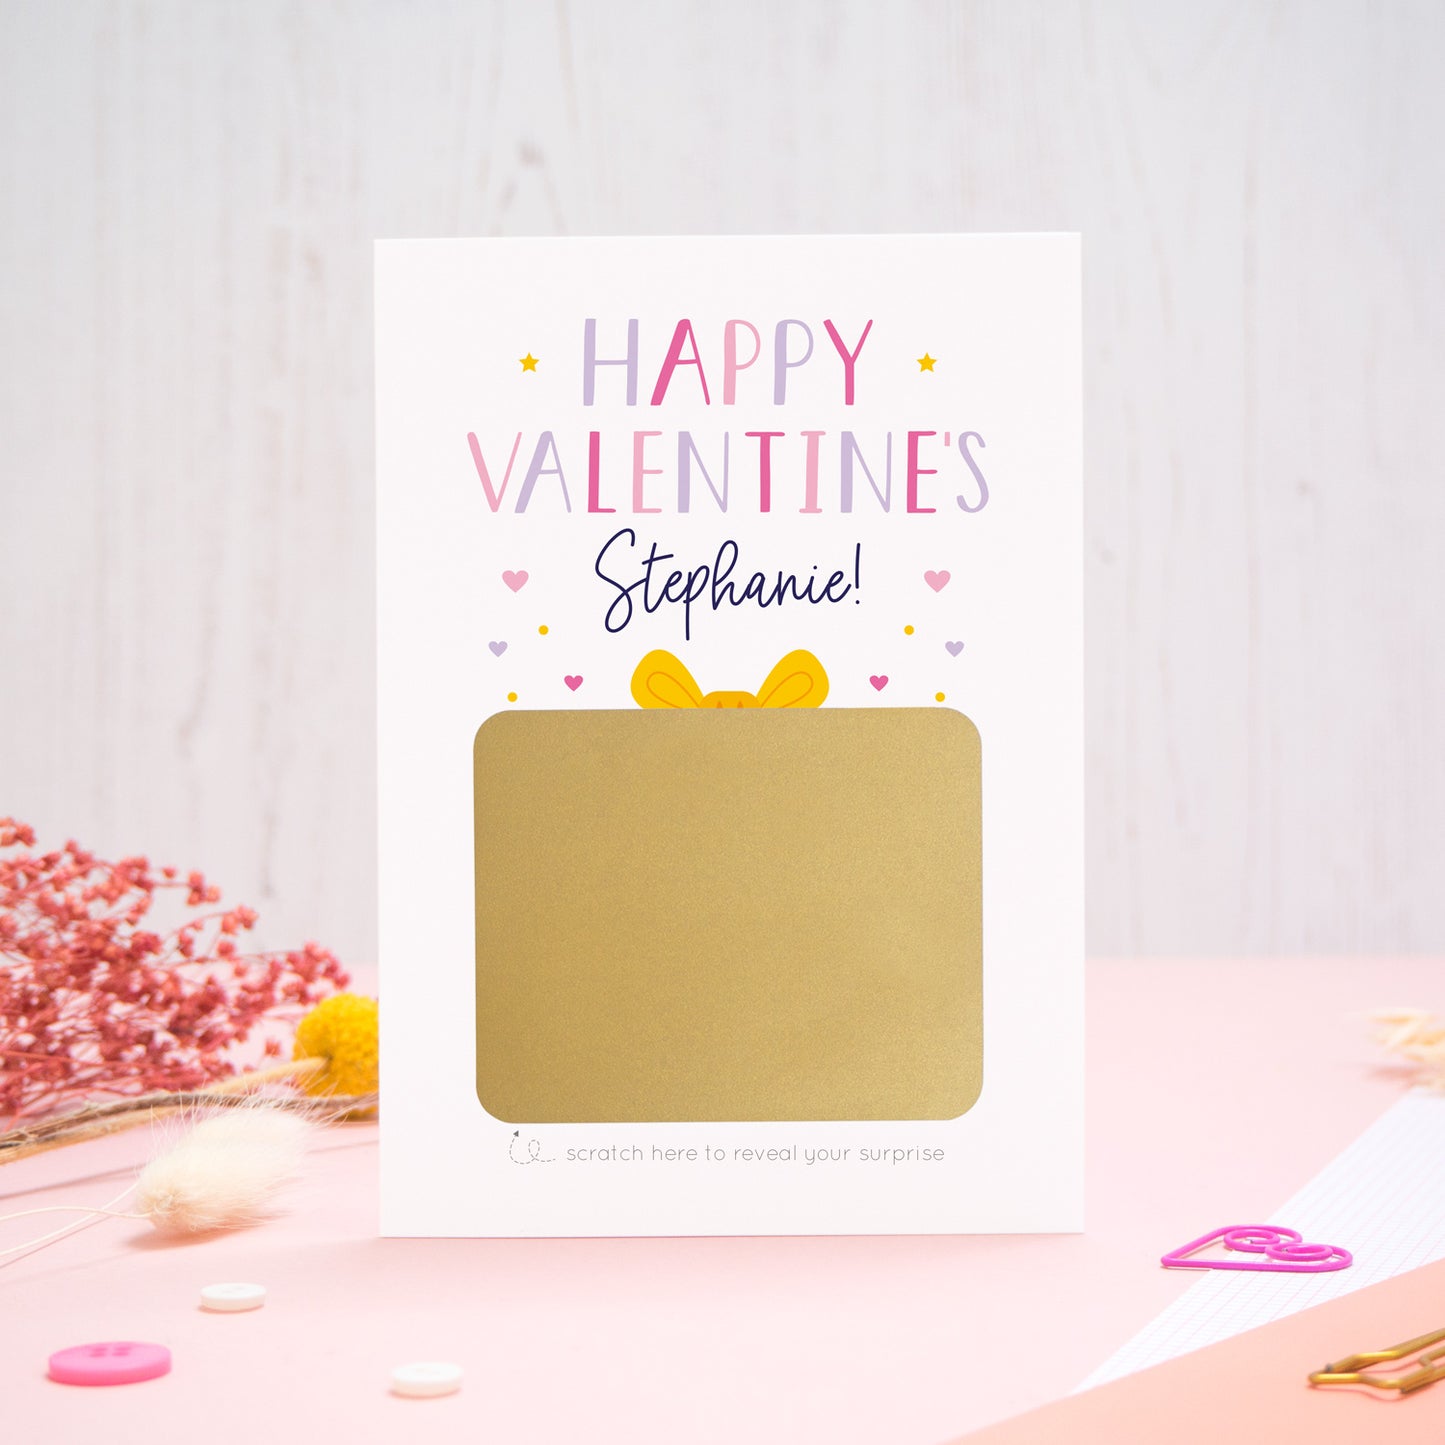 A personalised happy Valentine’s scratch card photographed on a pink background with floral props, paper clips, and buttons. The card has not yet been scratched off and is in the pink and lilac colour scheme.